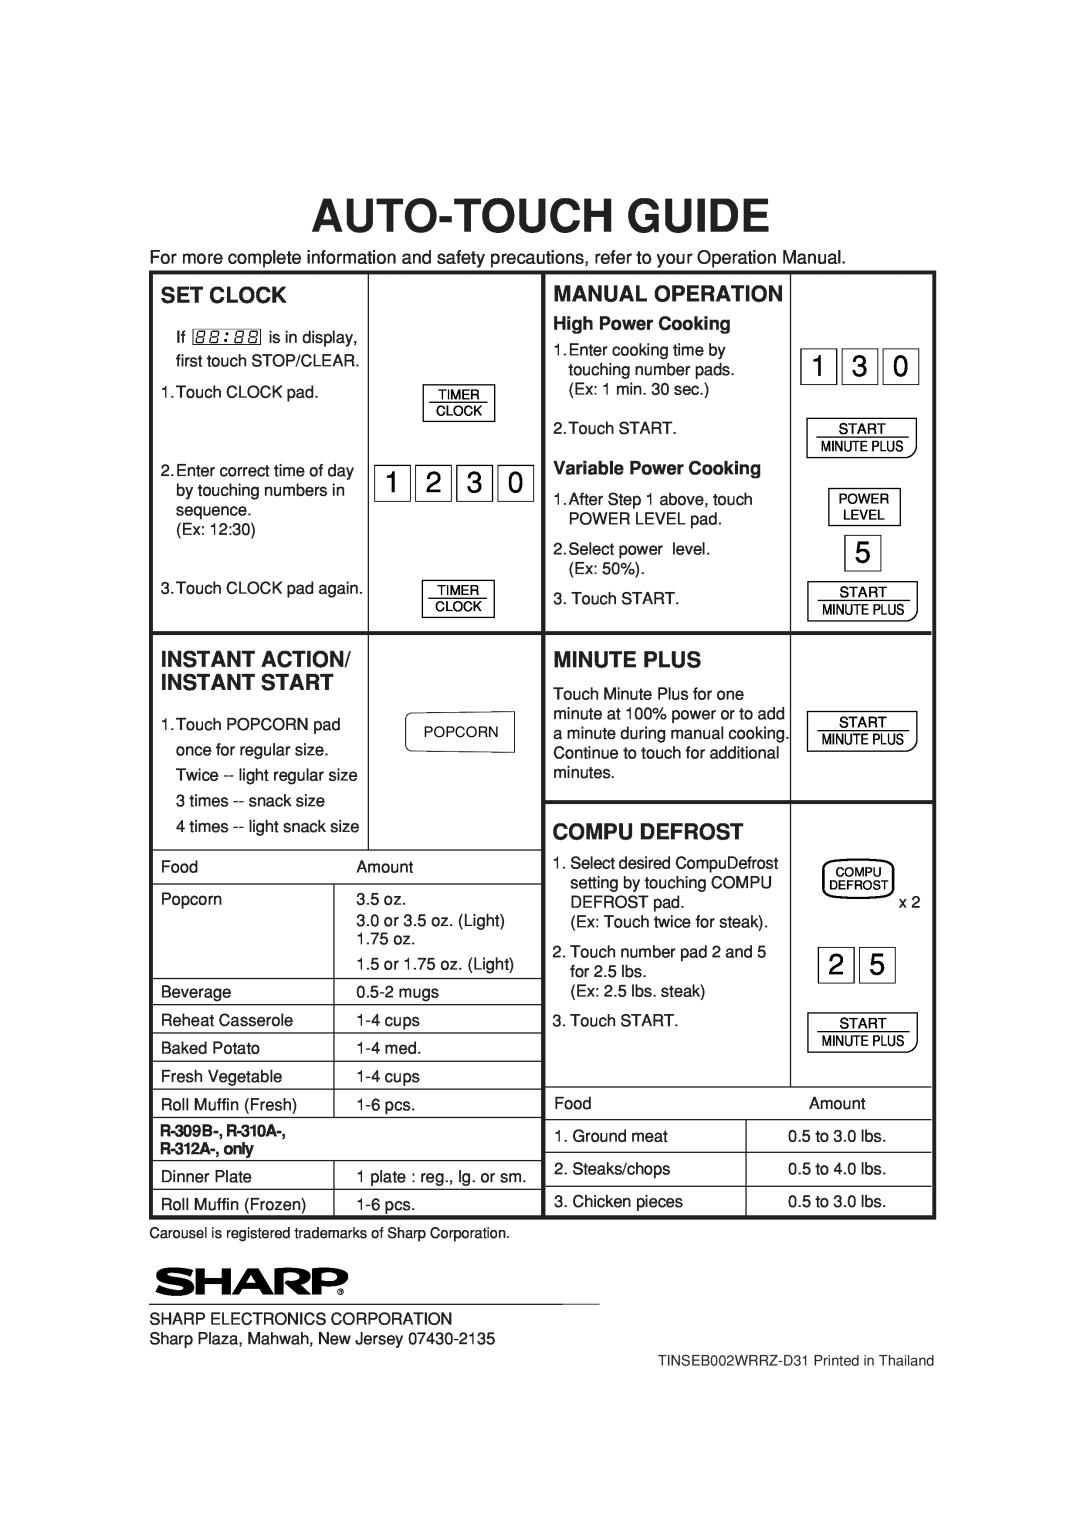 Sharp R-312A Auto-Touch Guide, Set Clock, Manual Operation, Minute Plus, Instant Start, Compu Defrost, Instant Action 